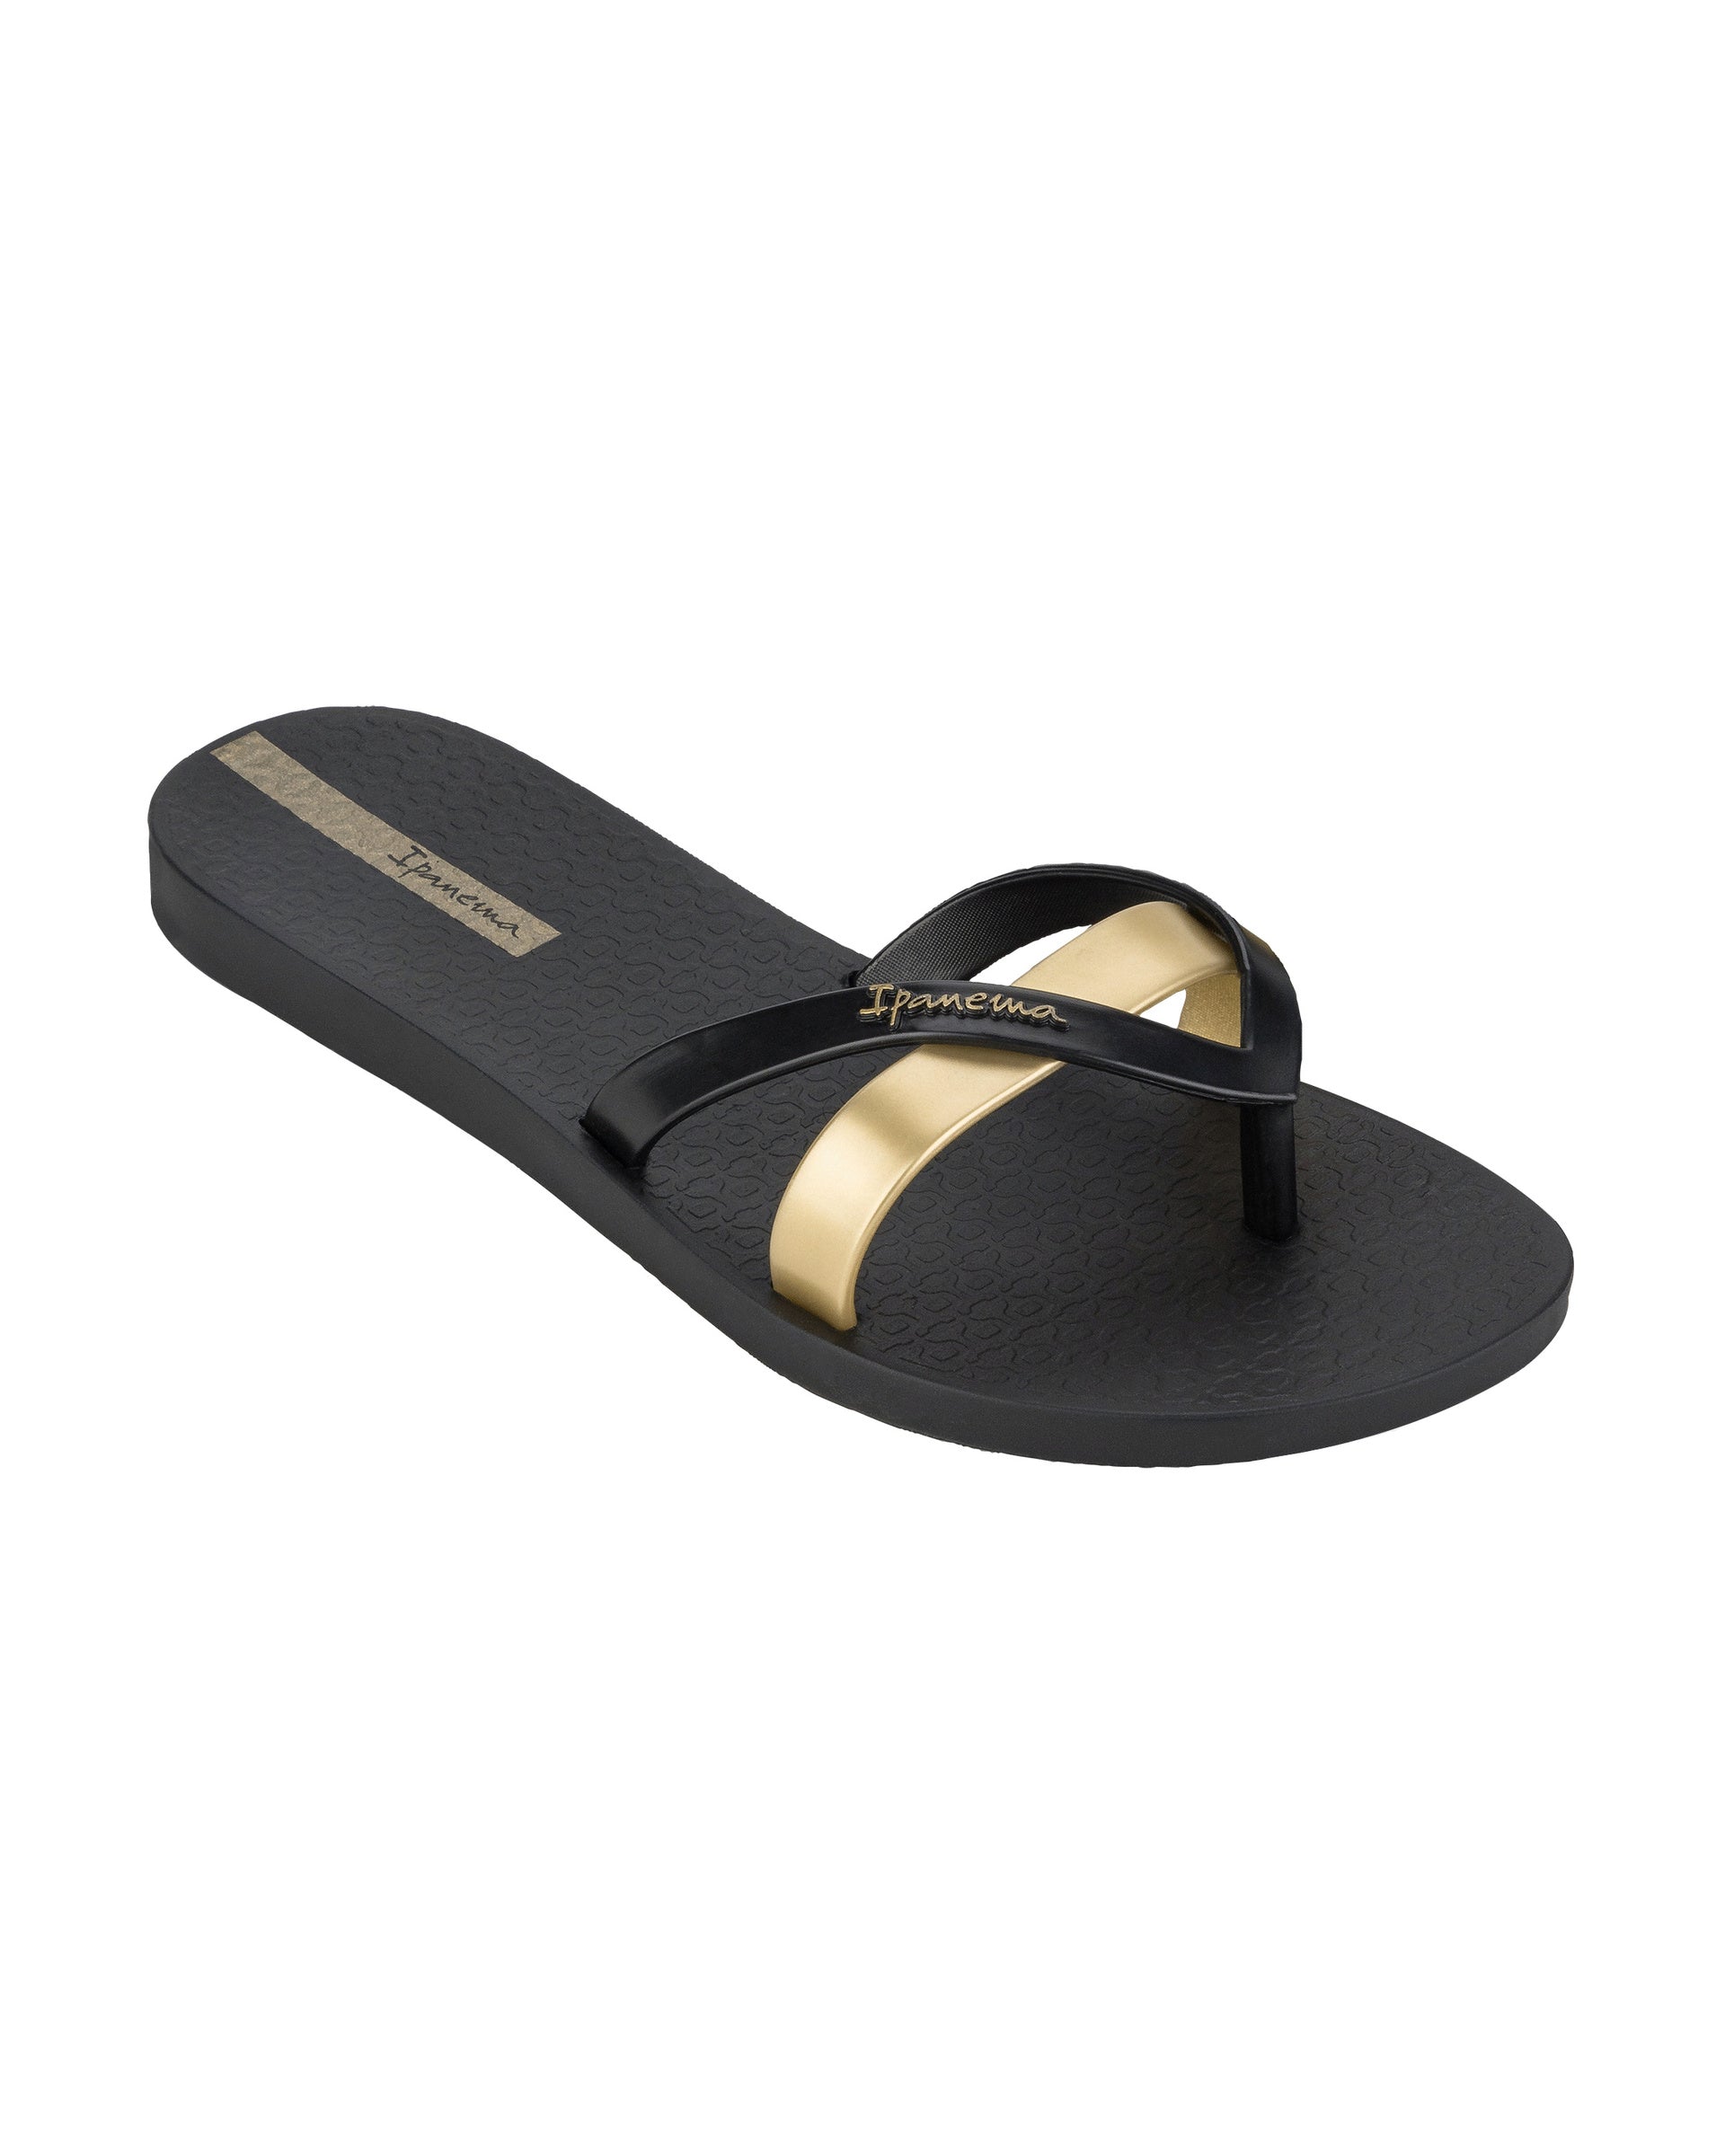 Angled view of a black and gold Ipanema Kirei women's flip flop.